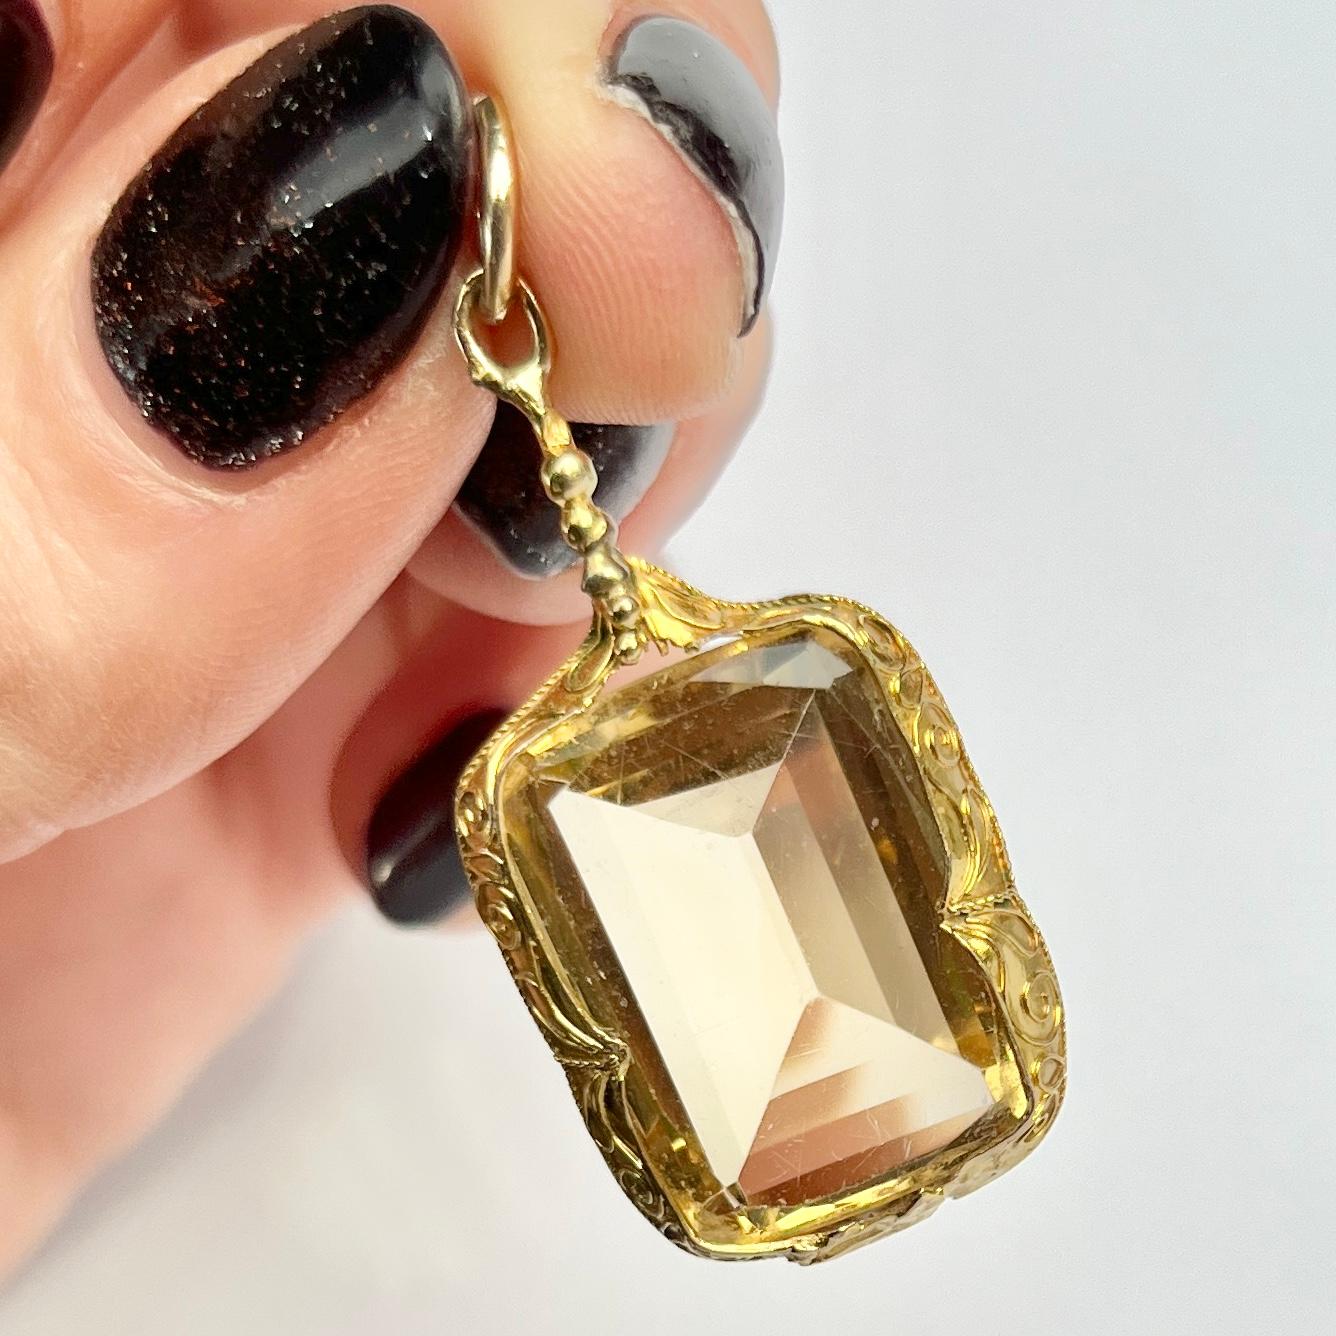 This gorgeous citrine fob can be attached to a necklace or a chain using the loop at the top. This is modelled in 9ct gold and the metal surrounding the stone os decorative.

Stone Dimensions: 21x14mm 

Weight: 5g